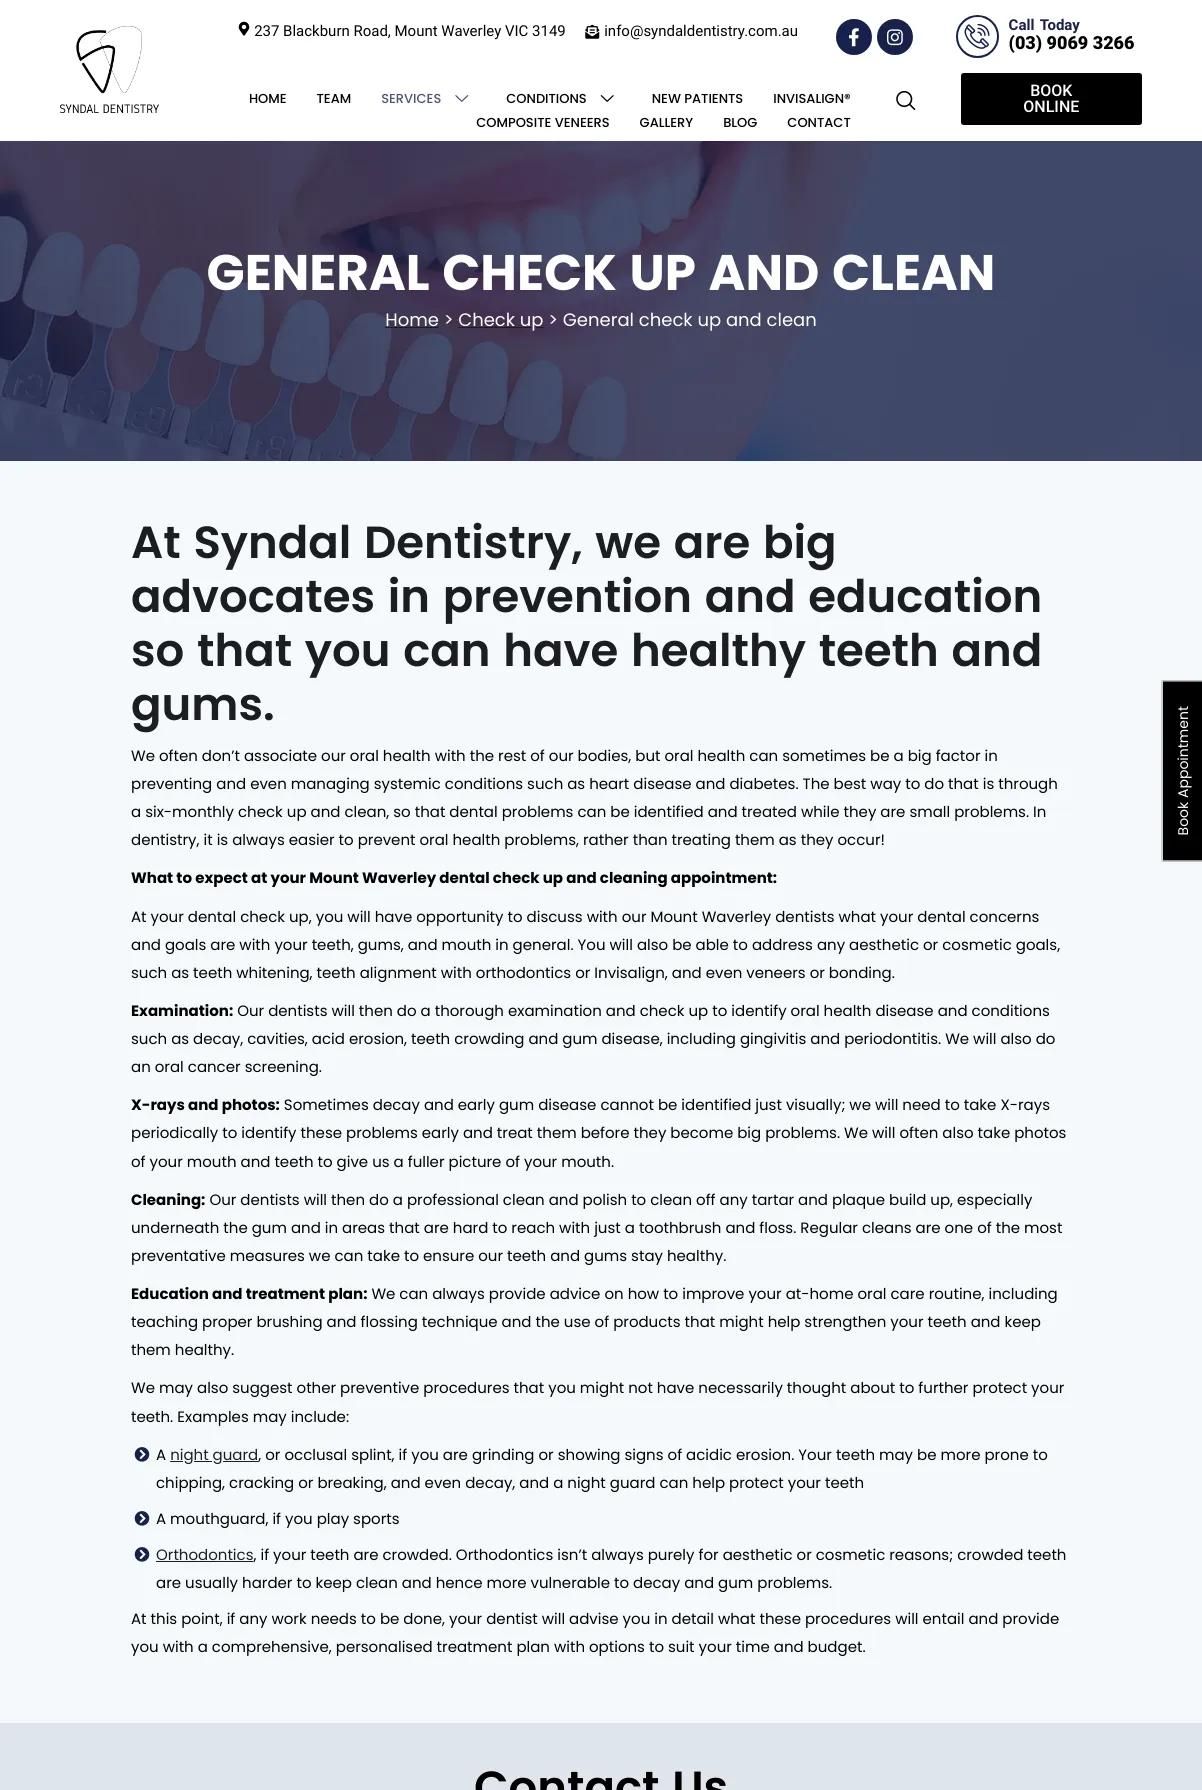 Screenshot 2 of Syndal Dentistry (Example Squarespace Dentist Website)